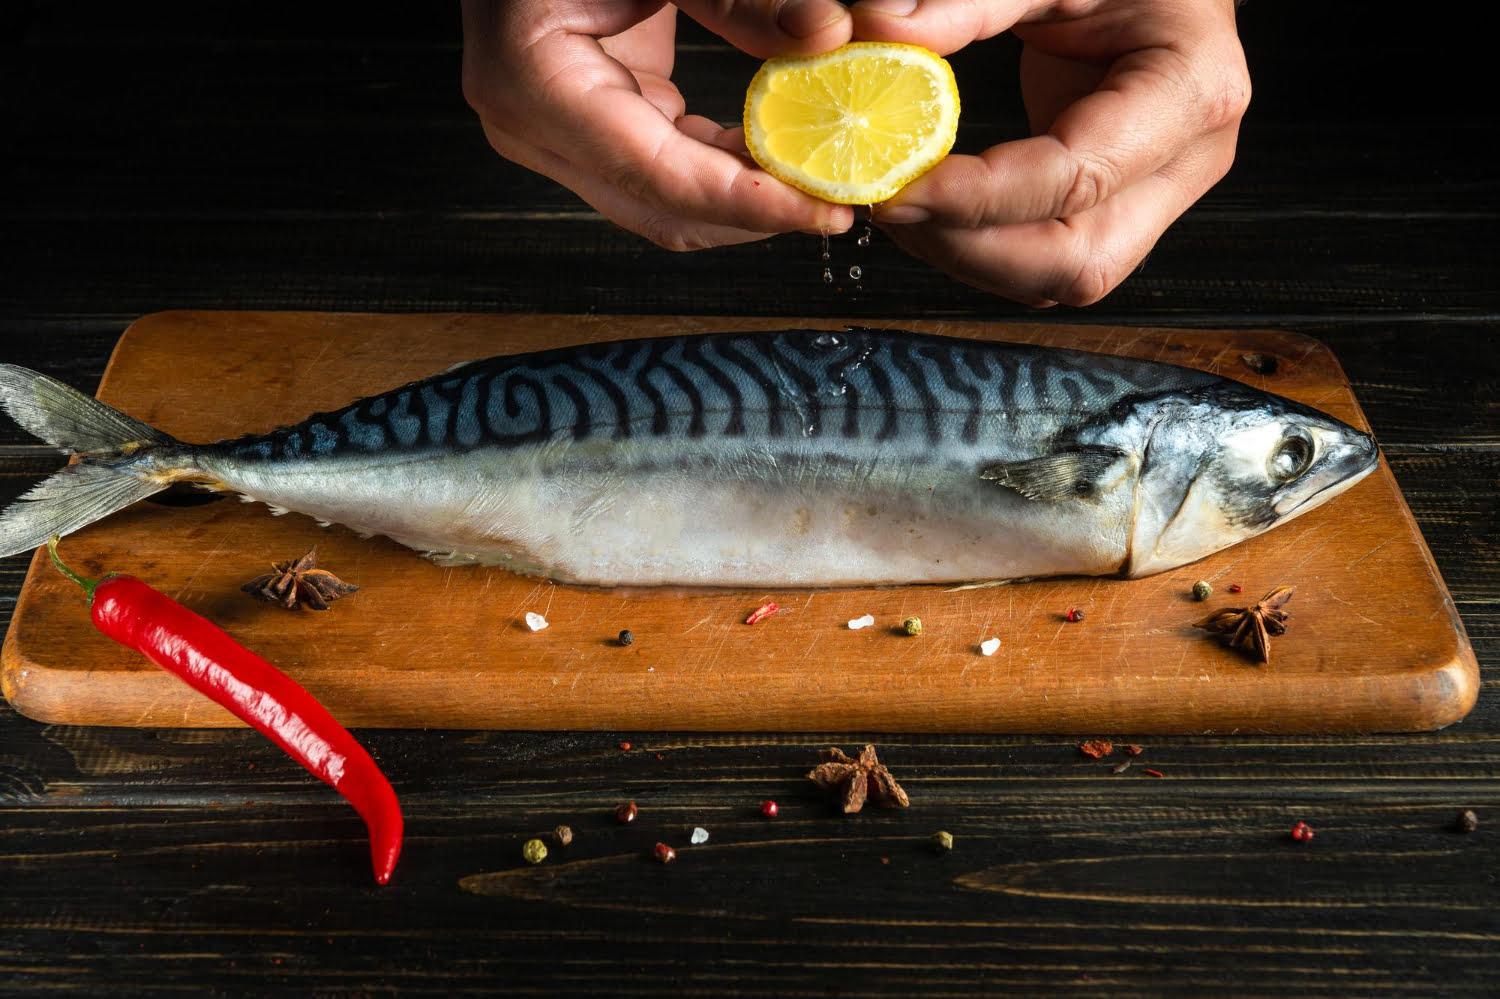 chef adds fresh lemon juice raw mackerel fish before cooking with ingredients aromatic spices